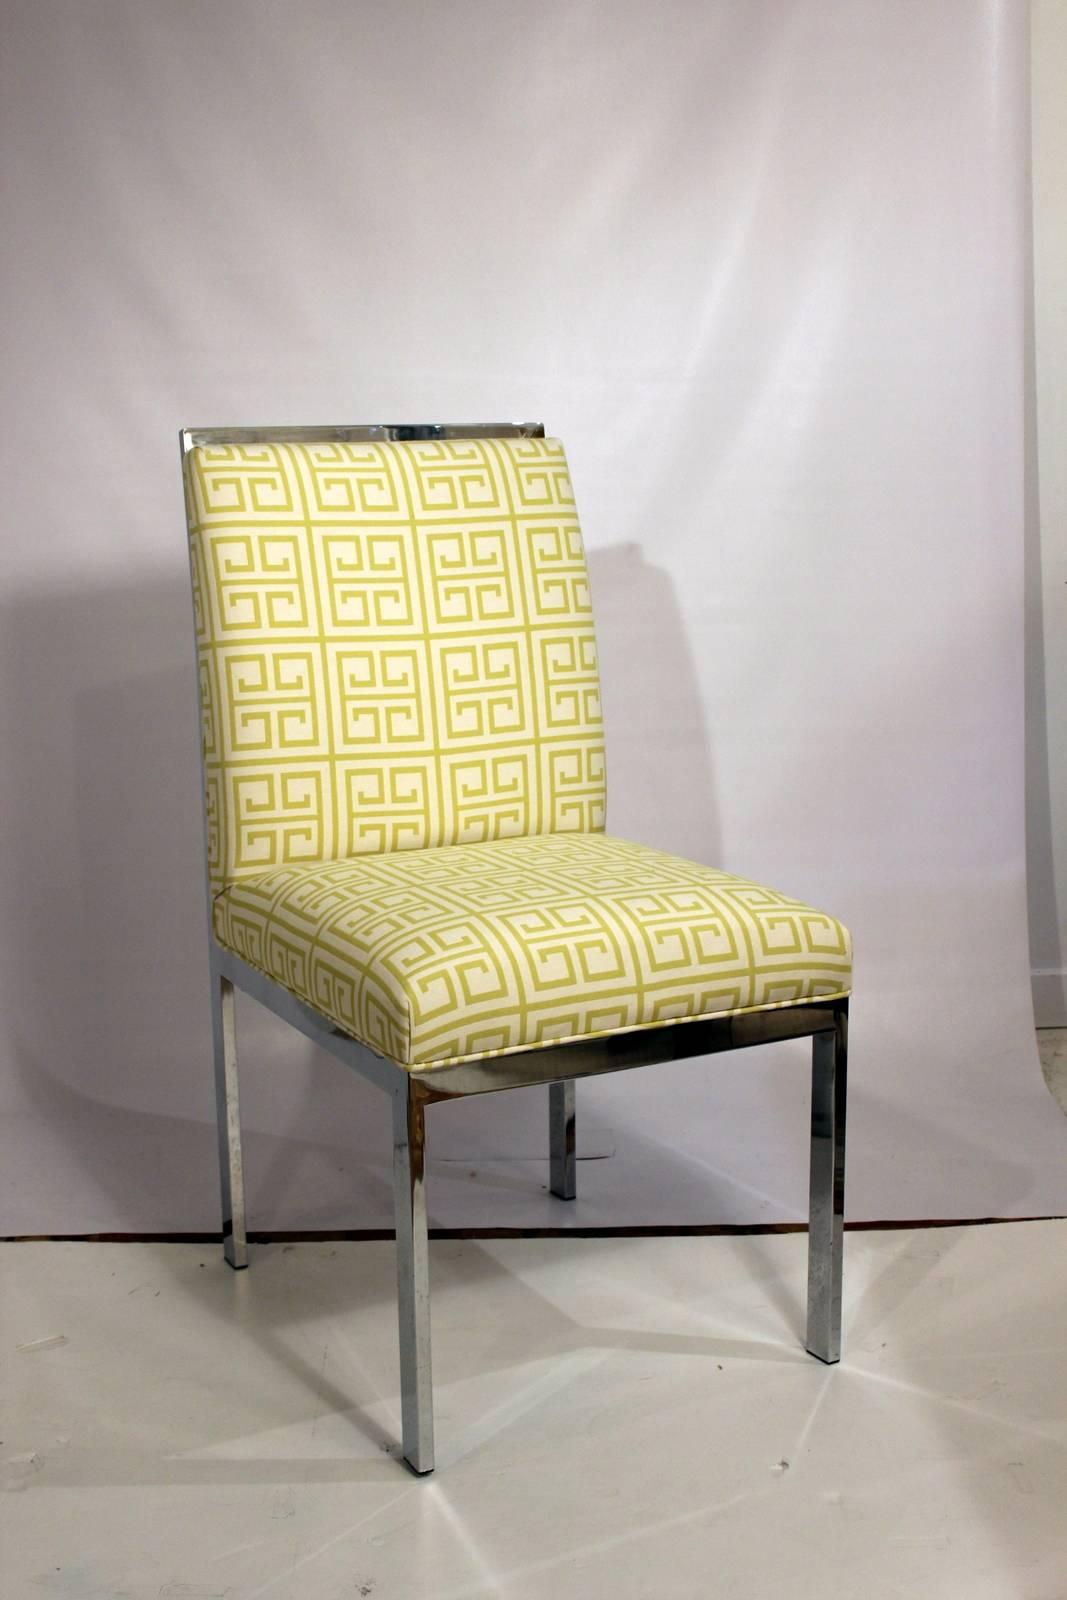 Pair of Mid-Century chrome chairs newly upholstered with Citron Greek key fabric. 
Additional fabric available $60.00 yard.